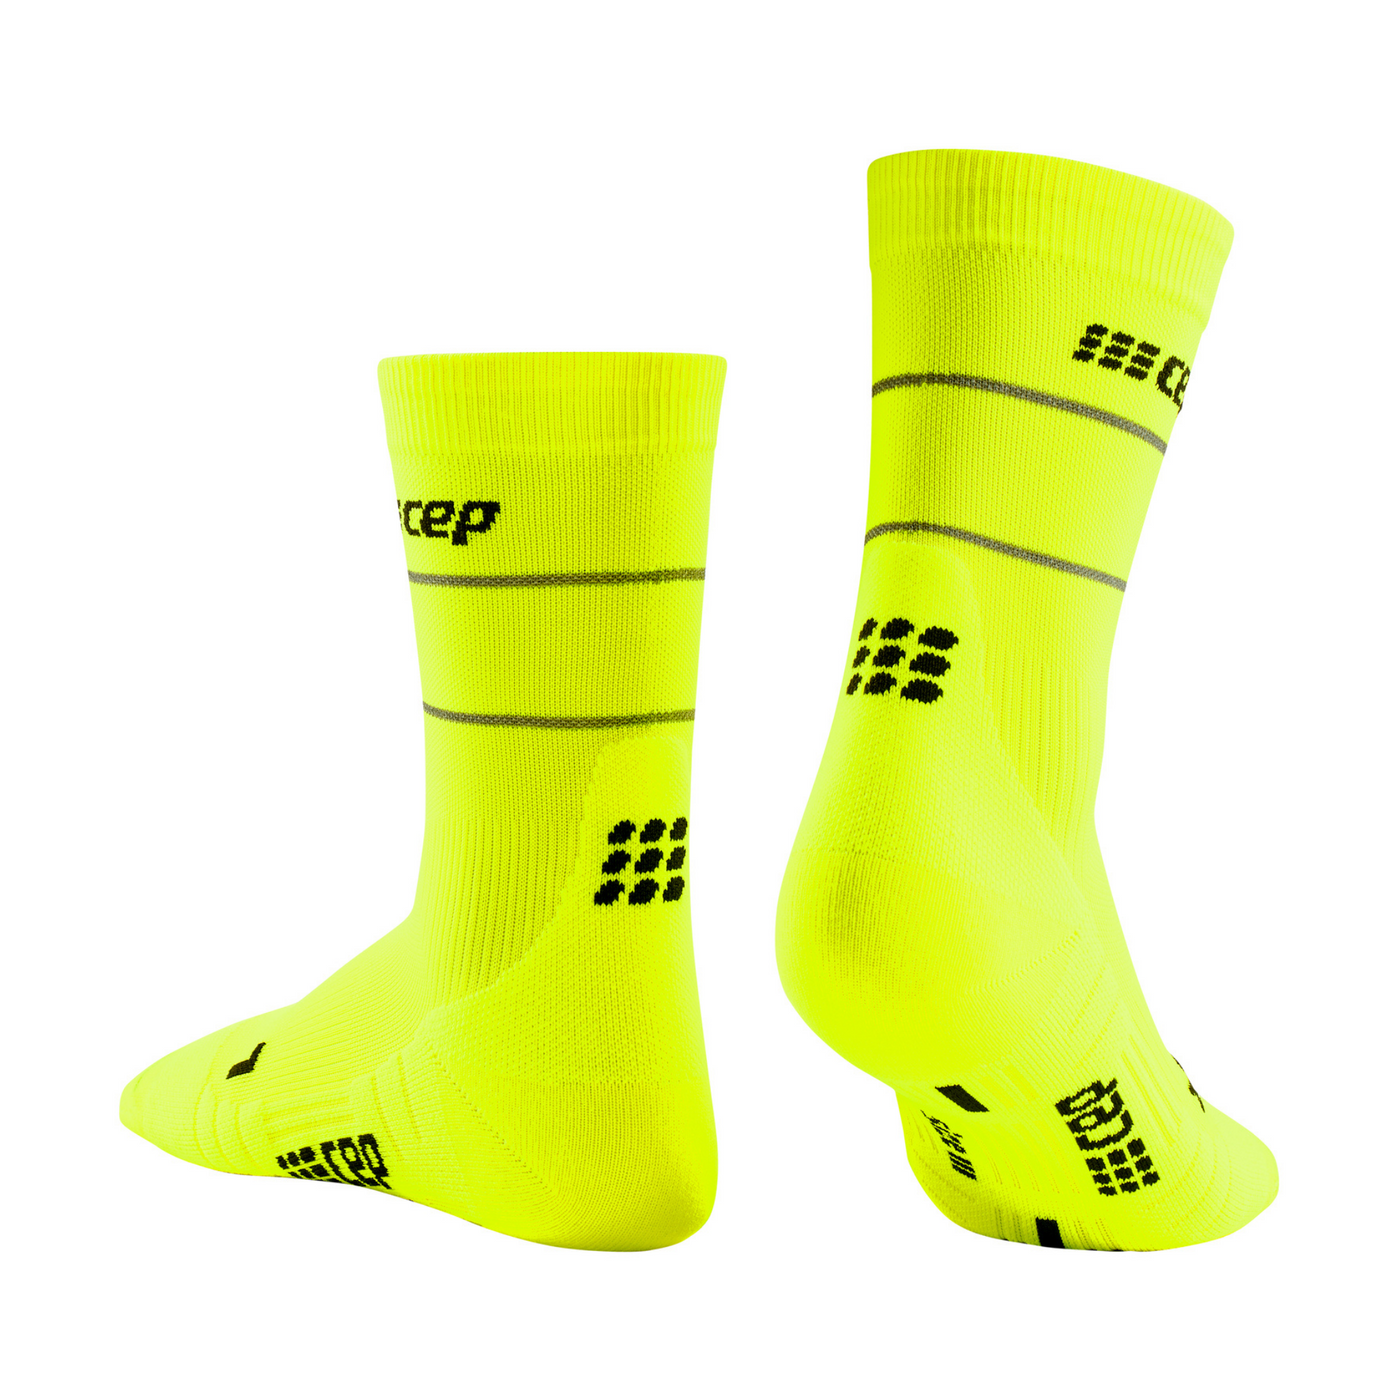 Reflective Mid Cut Compression Socks, Men, Neon Yellow/Silver, Back View